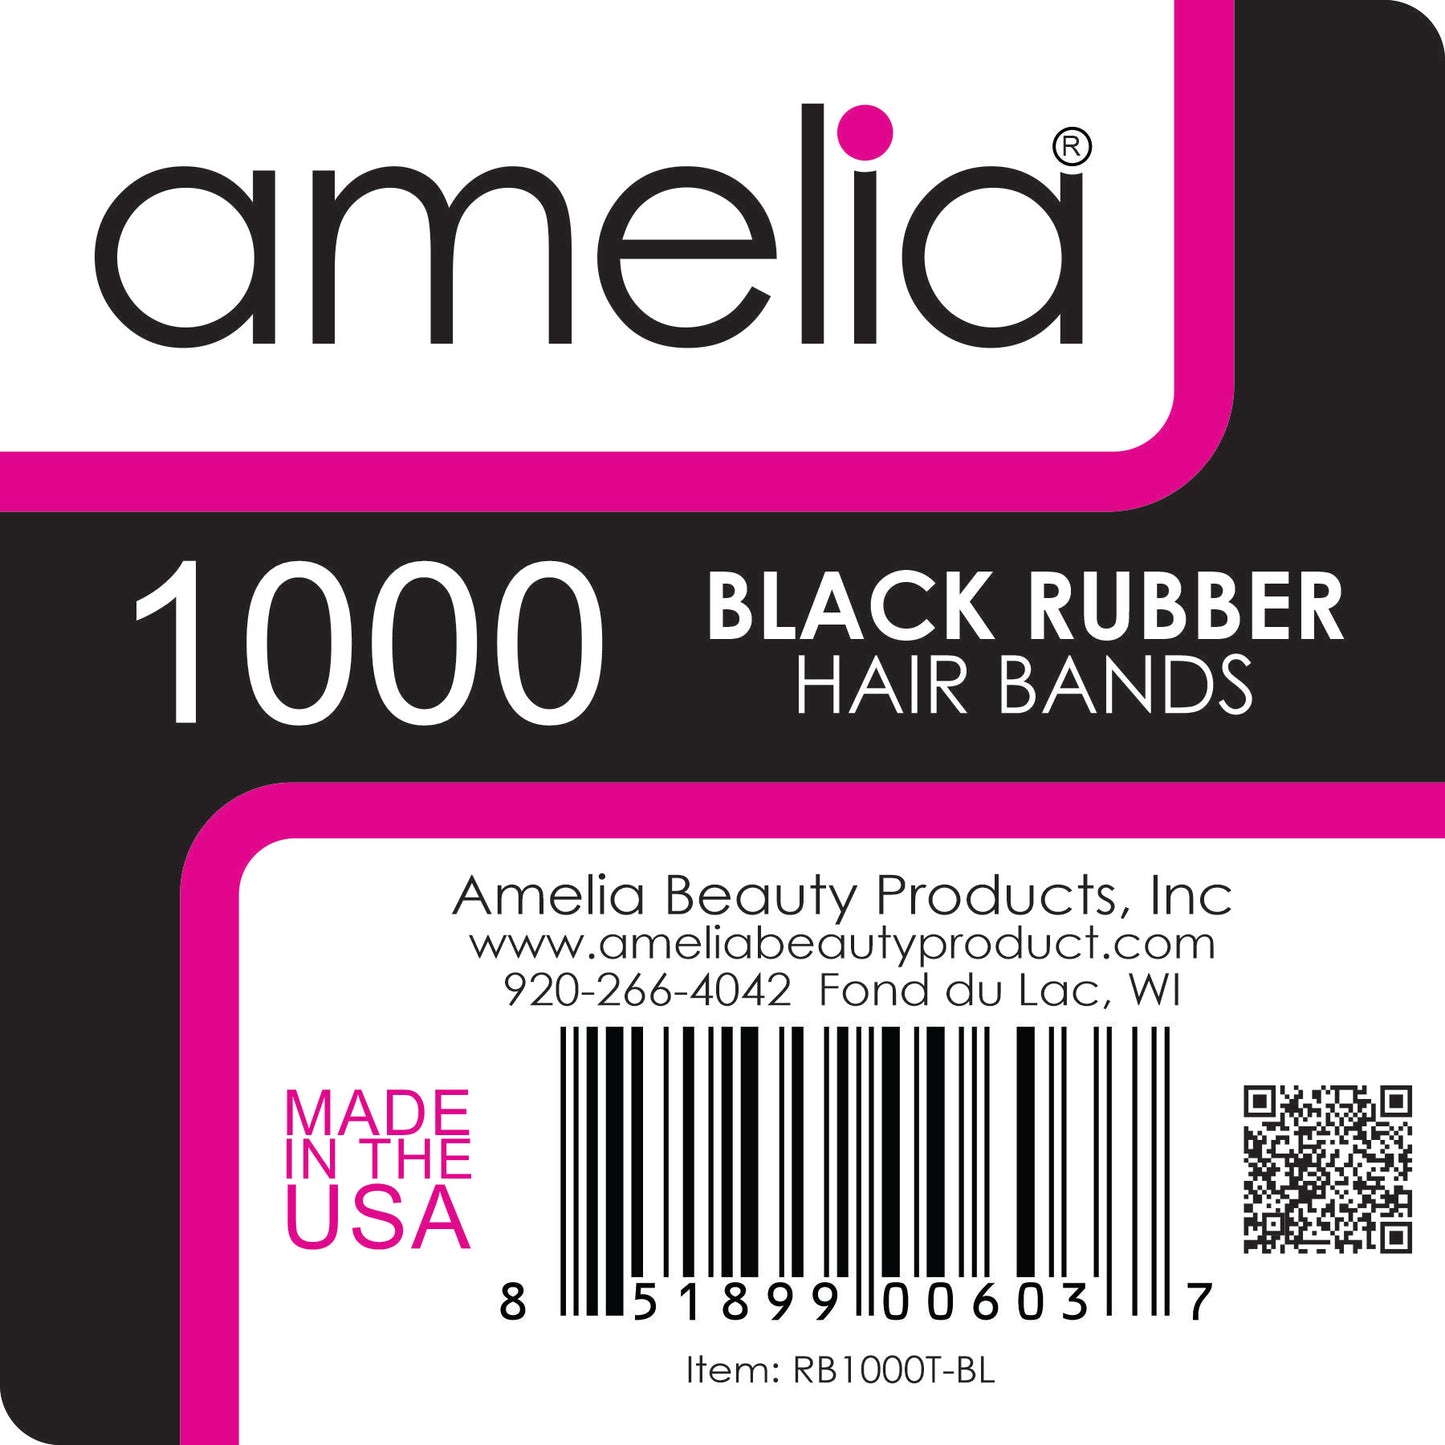 Amelia Beauty | 1/2in, Black, Elastic Rubber Band Pony Tail Holders | Made in USA, Ideal for Ponytails, Braids, Twists, Dreadlocks, Styling Accessories for Women, Men and Girls | 1000 Pack